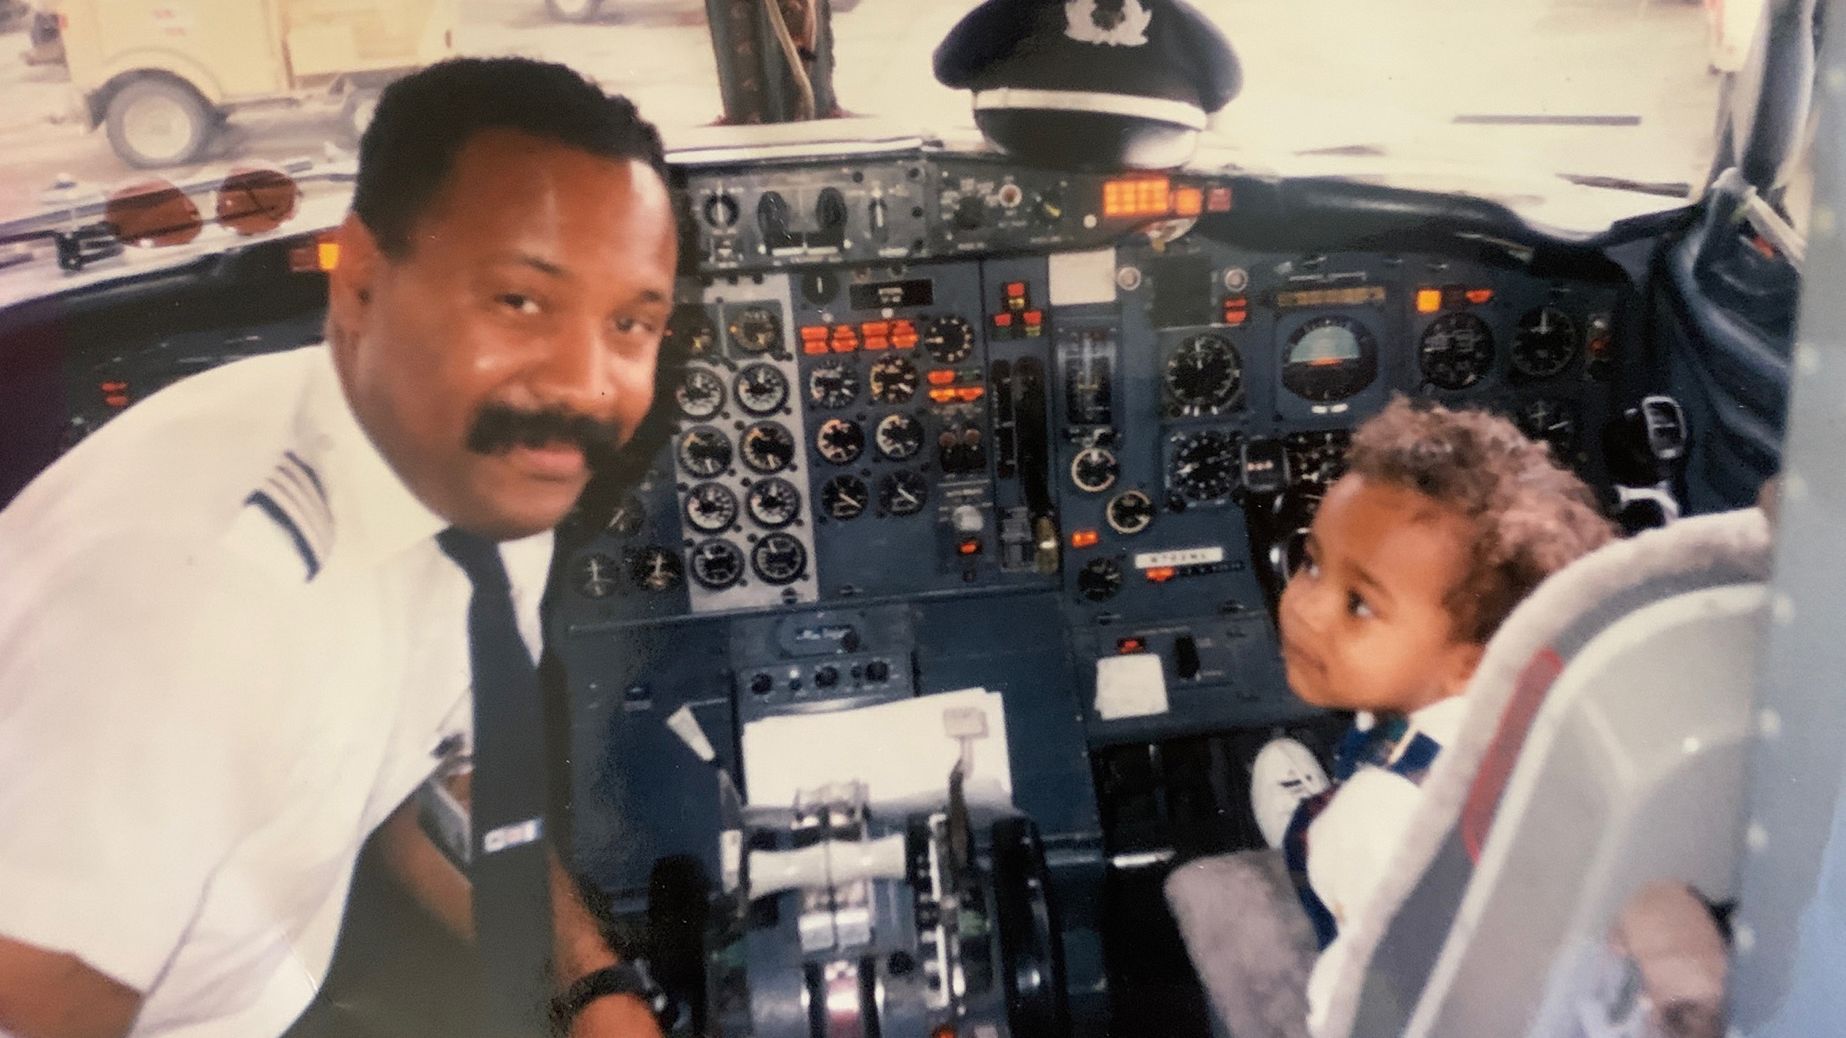 Here's Captain Ruben Flowers and his son Ruben Flowers photographed in an airplane cockpit in 1994.